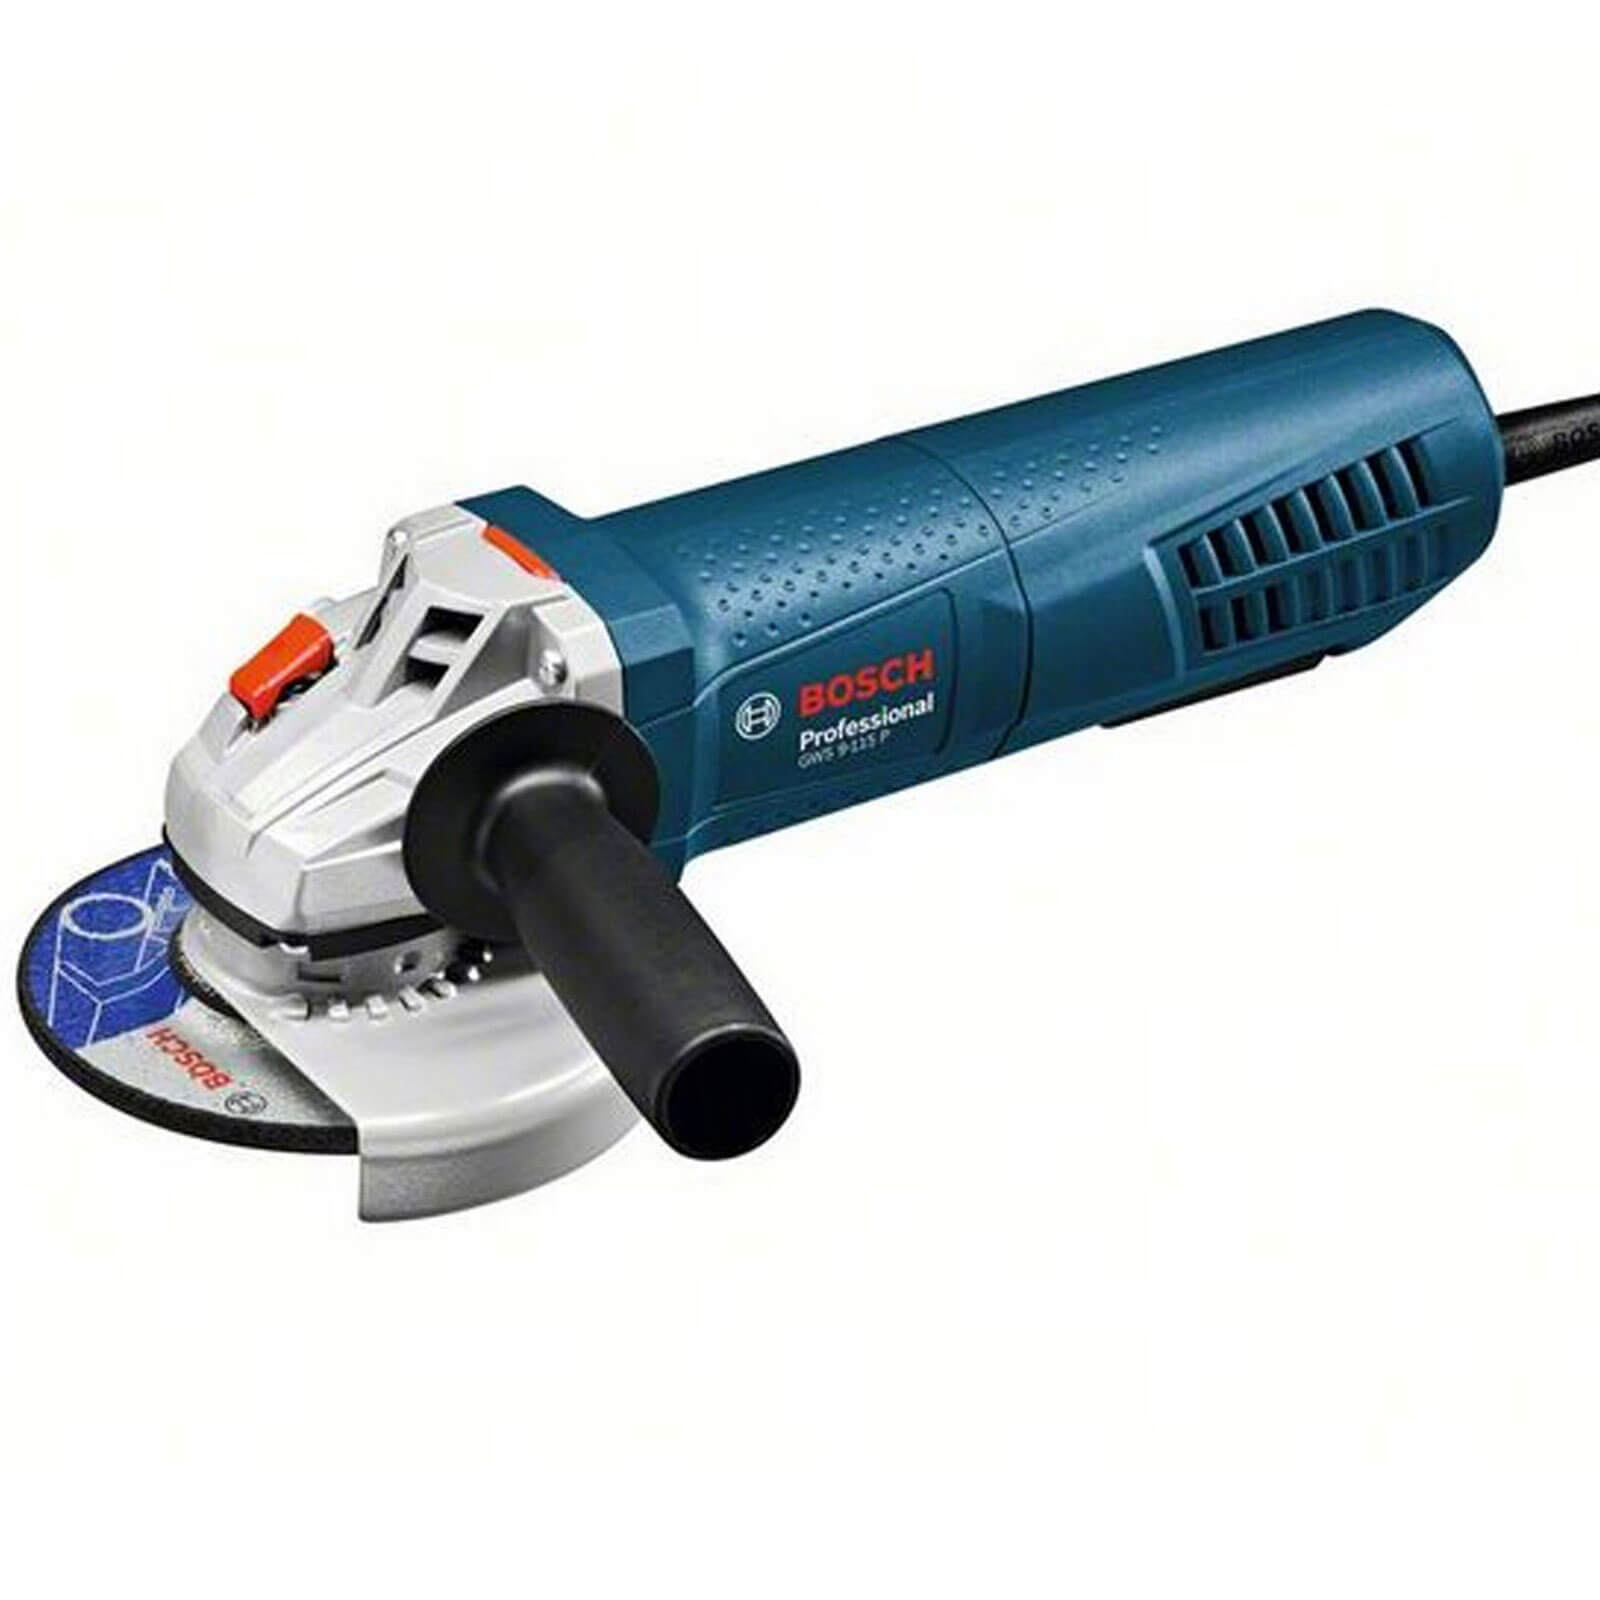 Bosch GWS 9-115 P Angle Grinder with PROtection Switch 115mm / 4.5" Disc 900w 240v